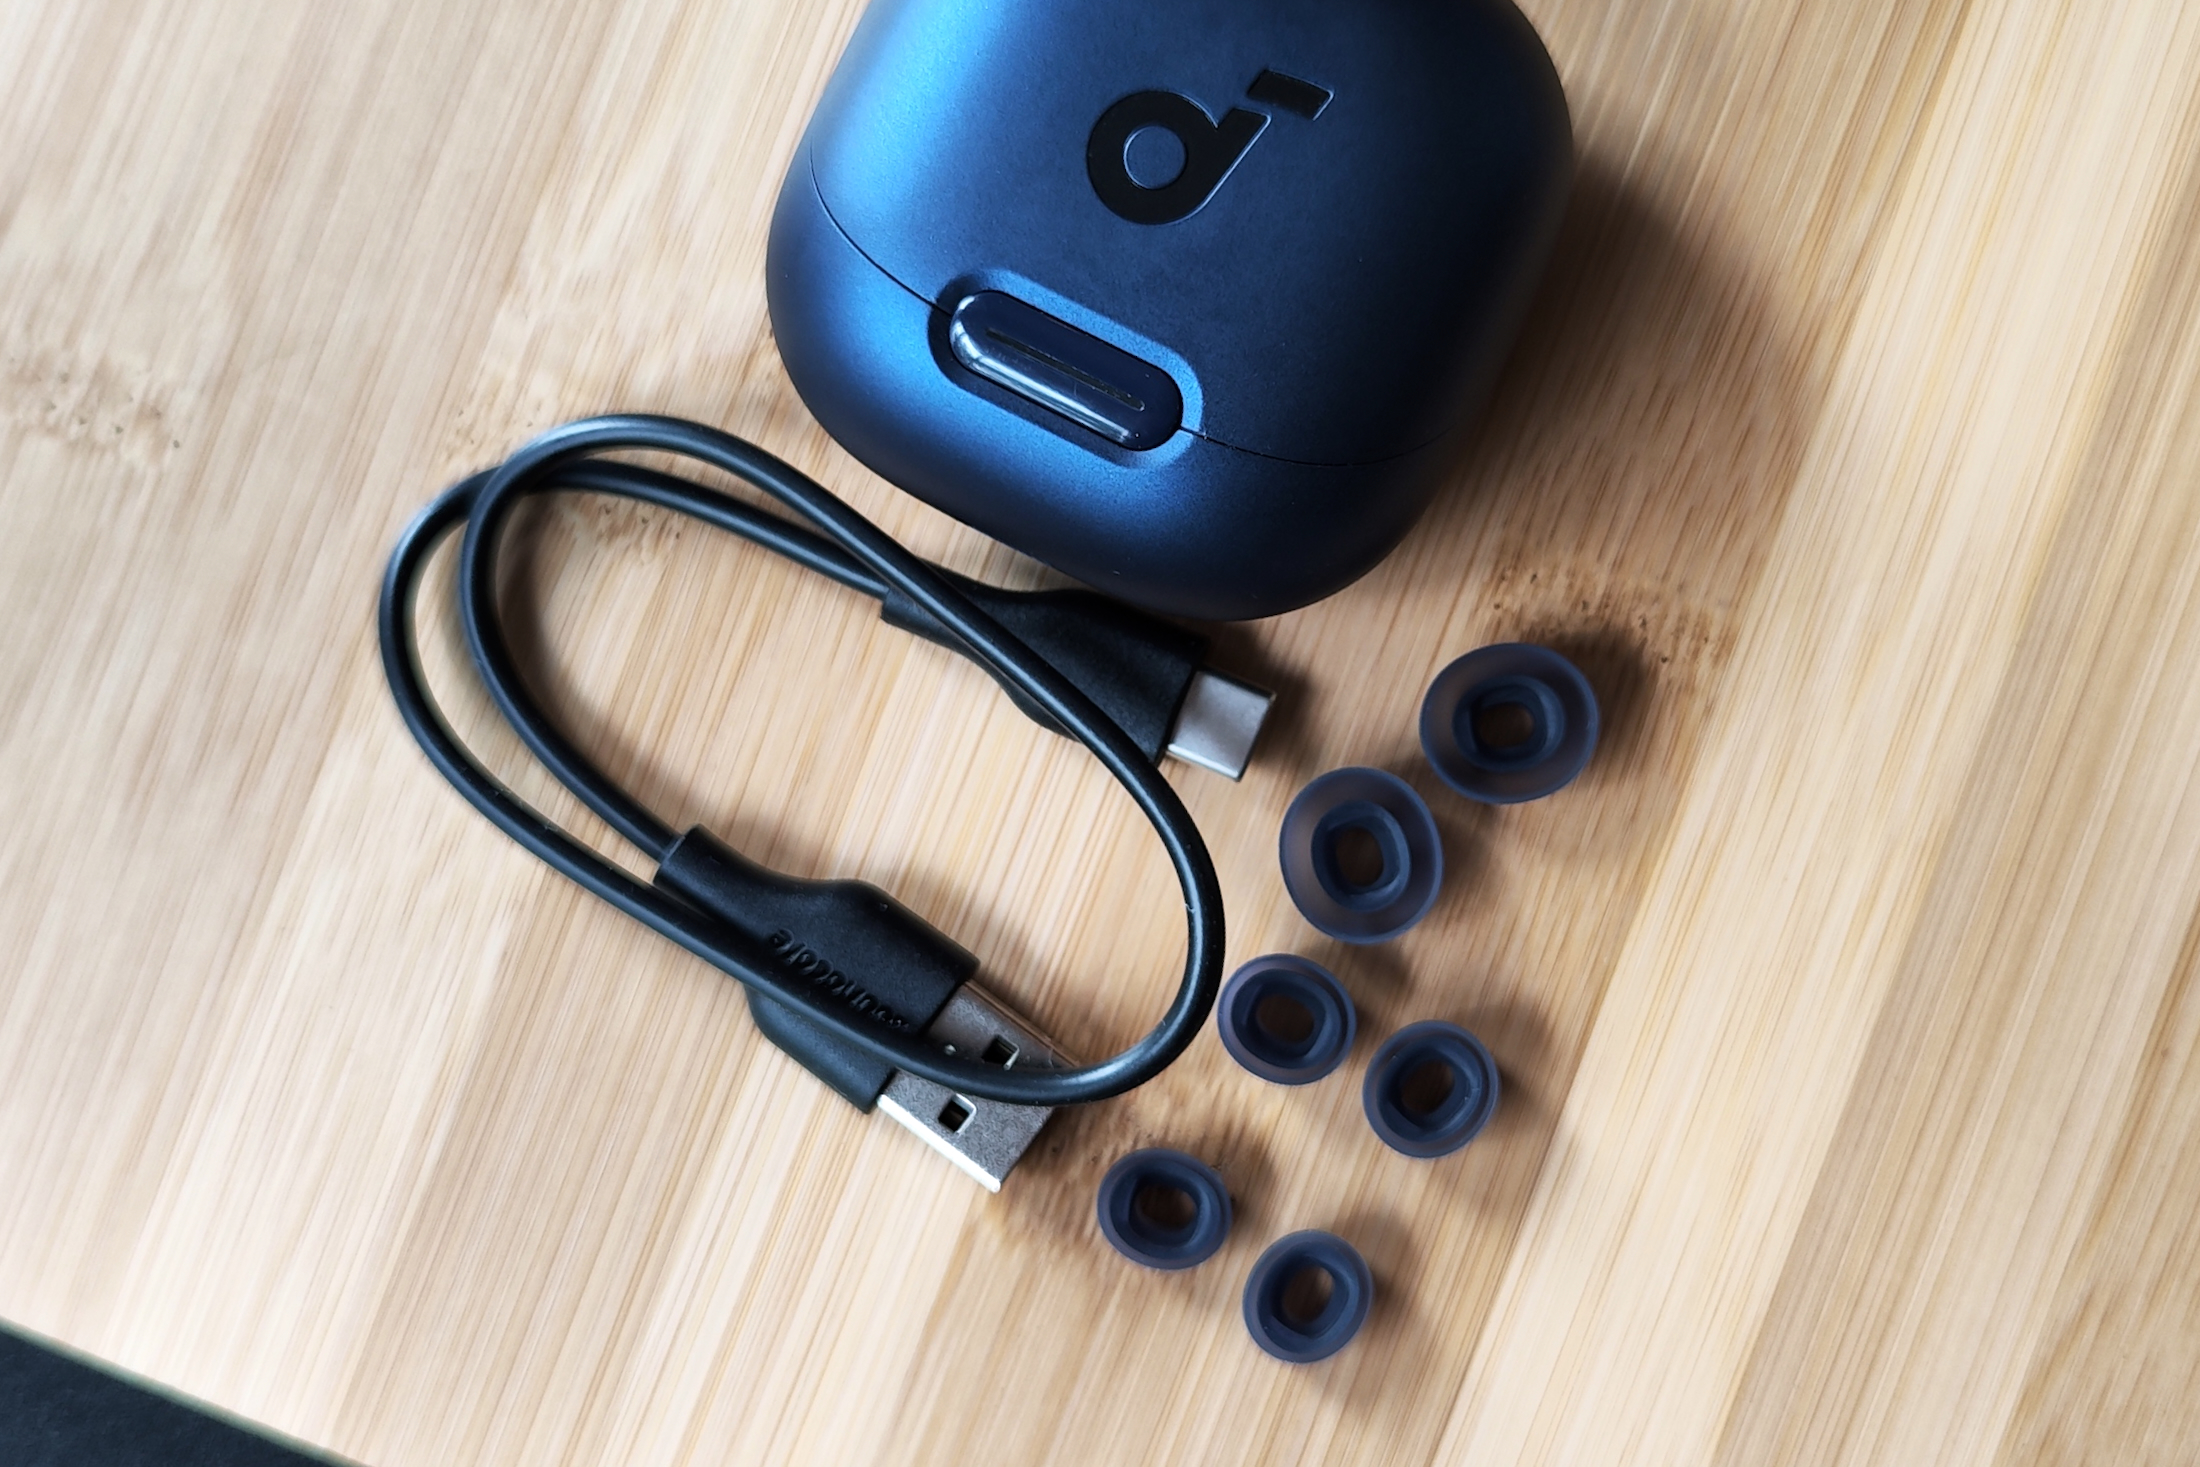 Anker Soundcore Liberty 4 NC review: just buy 'em